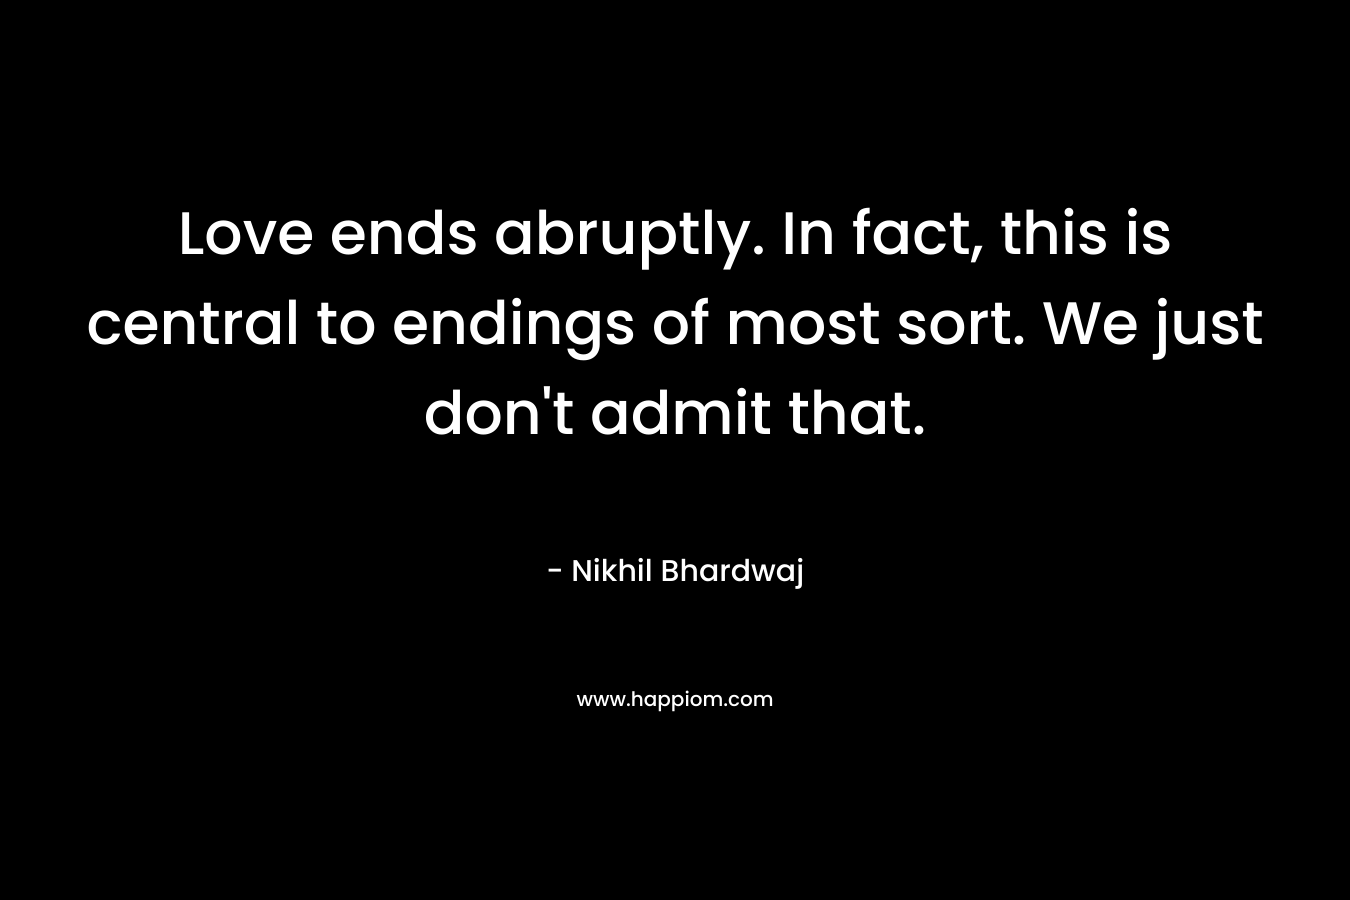 Love ends abruptly. In fact, this is central to endings of most sort. We just don’t admit that. – Nikhil Bhardwaj